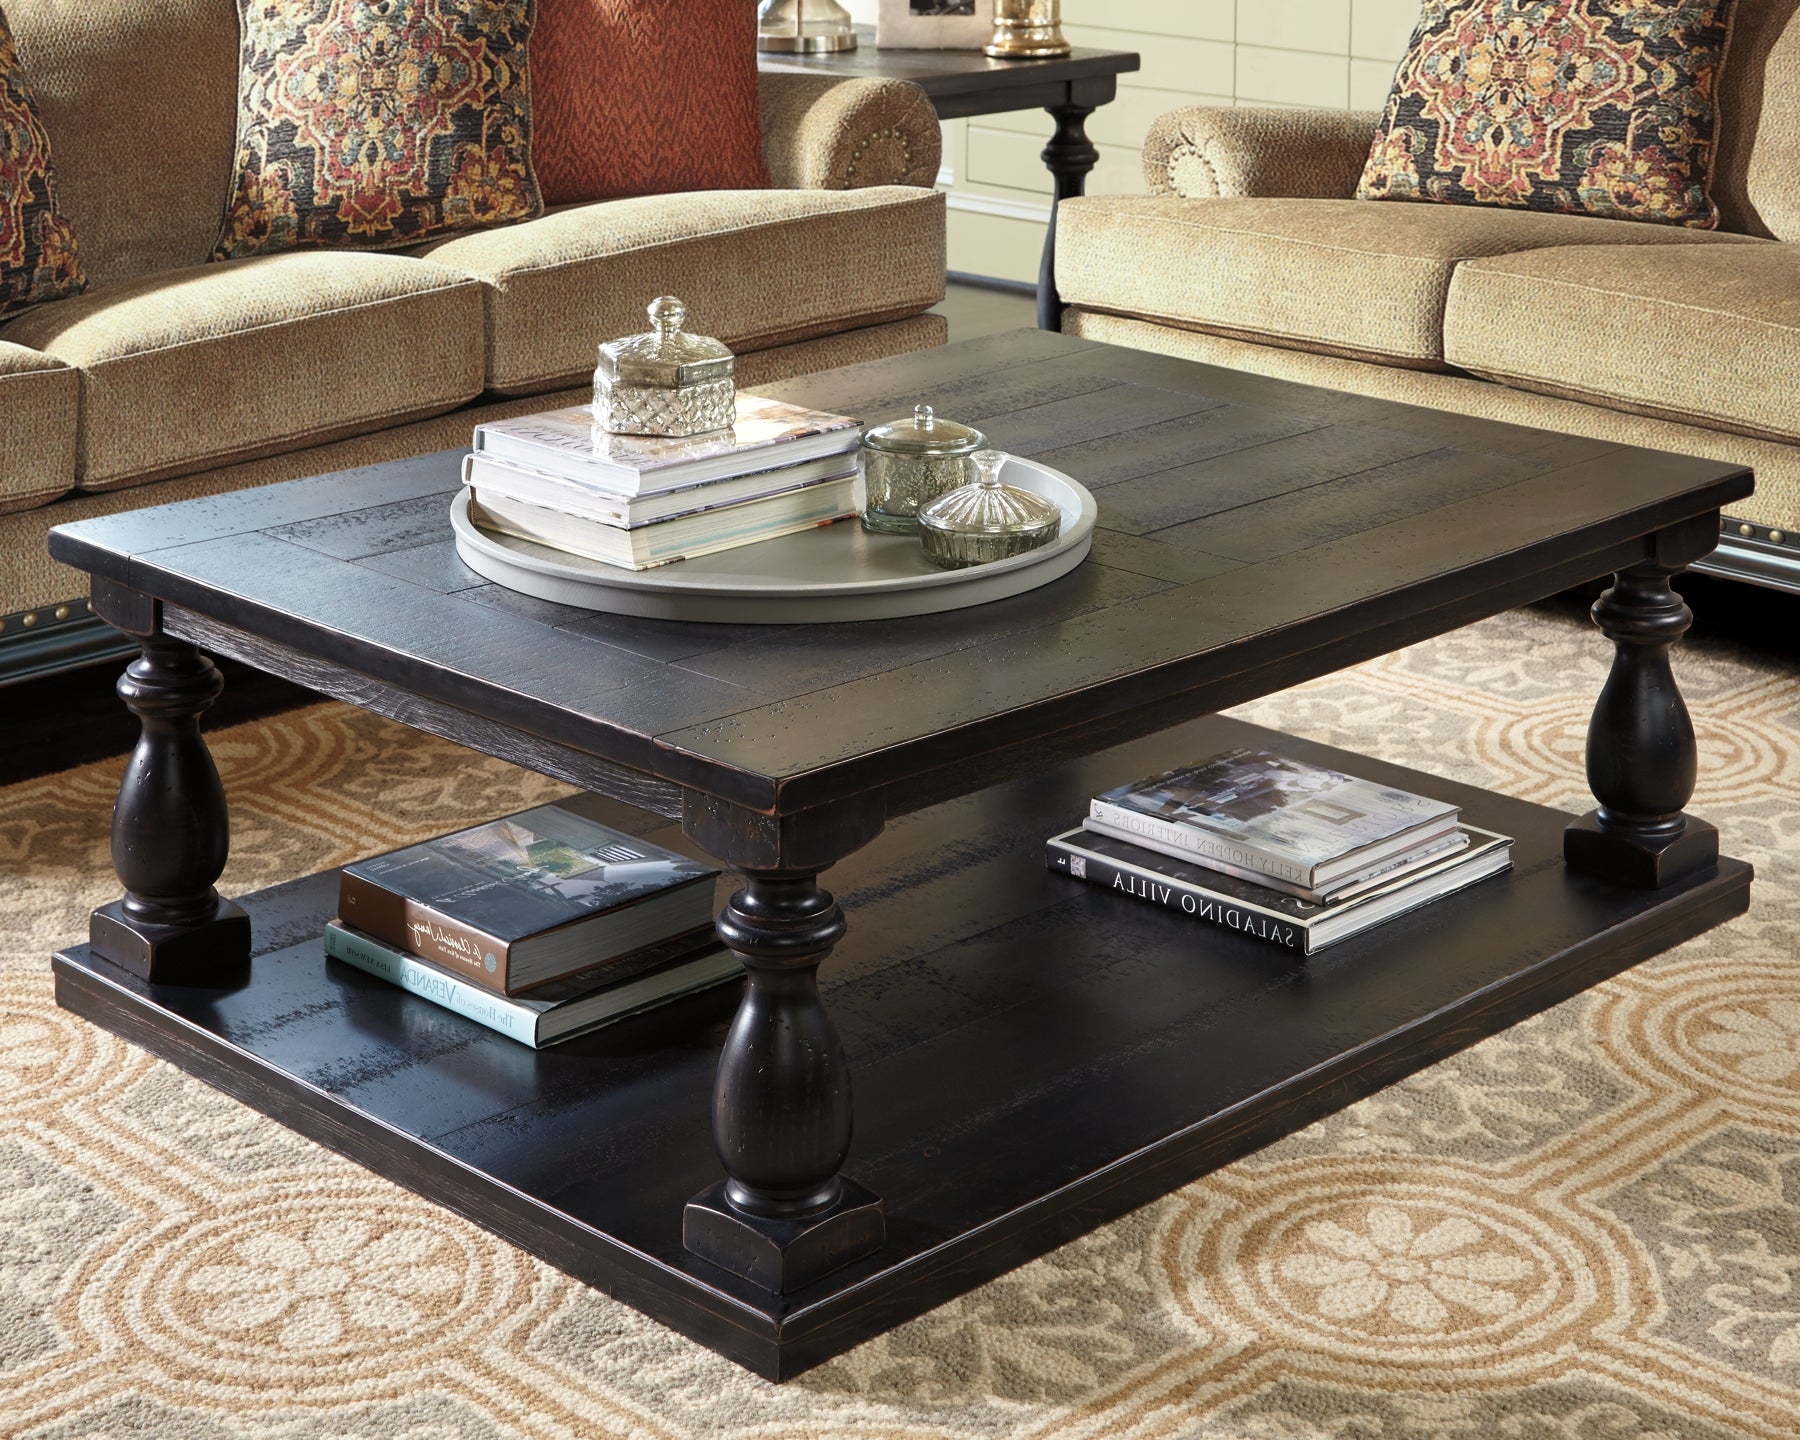 Mallacar Coffee Table with 2 End Tables Wilson Furniture (OH)  in Bridgeport, Ohio. Serving Bridgeport, Yorkville, Bellaire, & Avondale